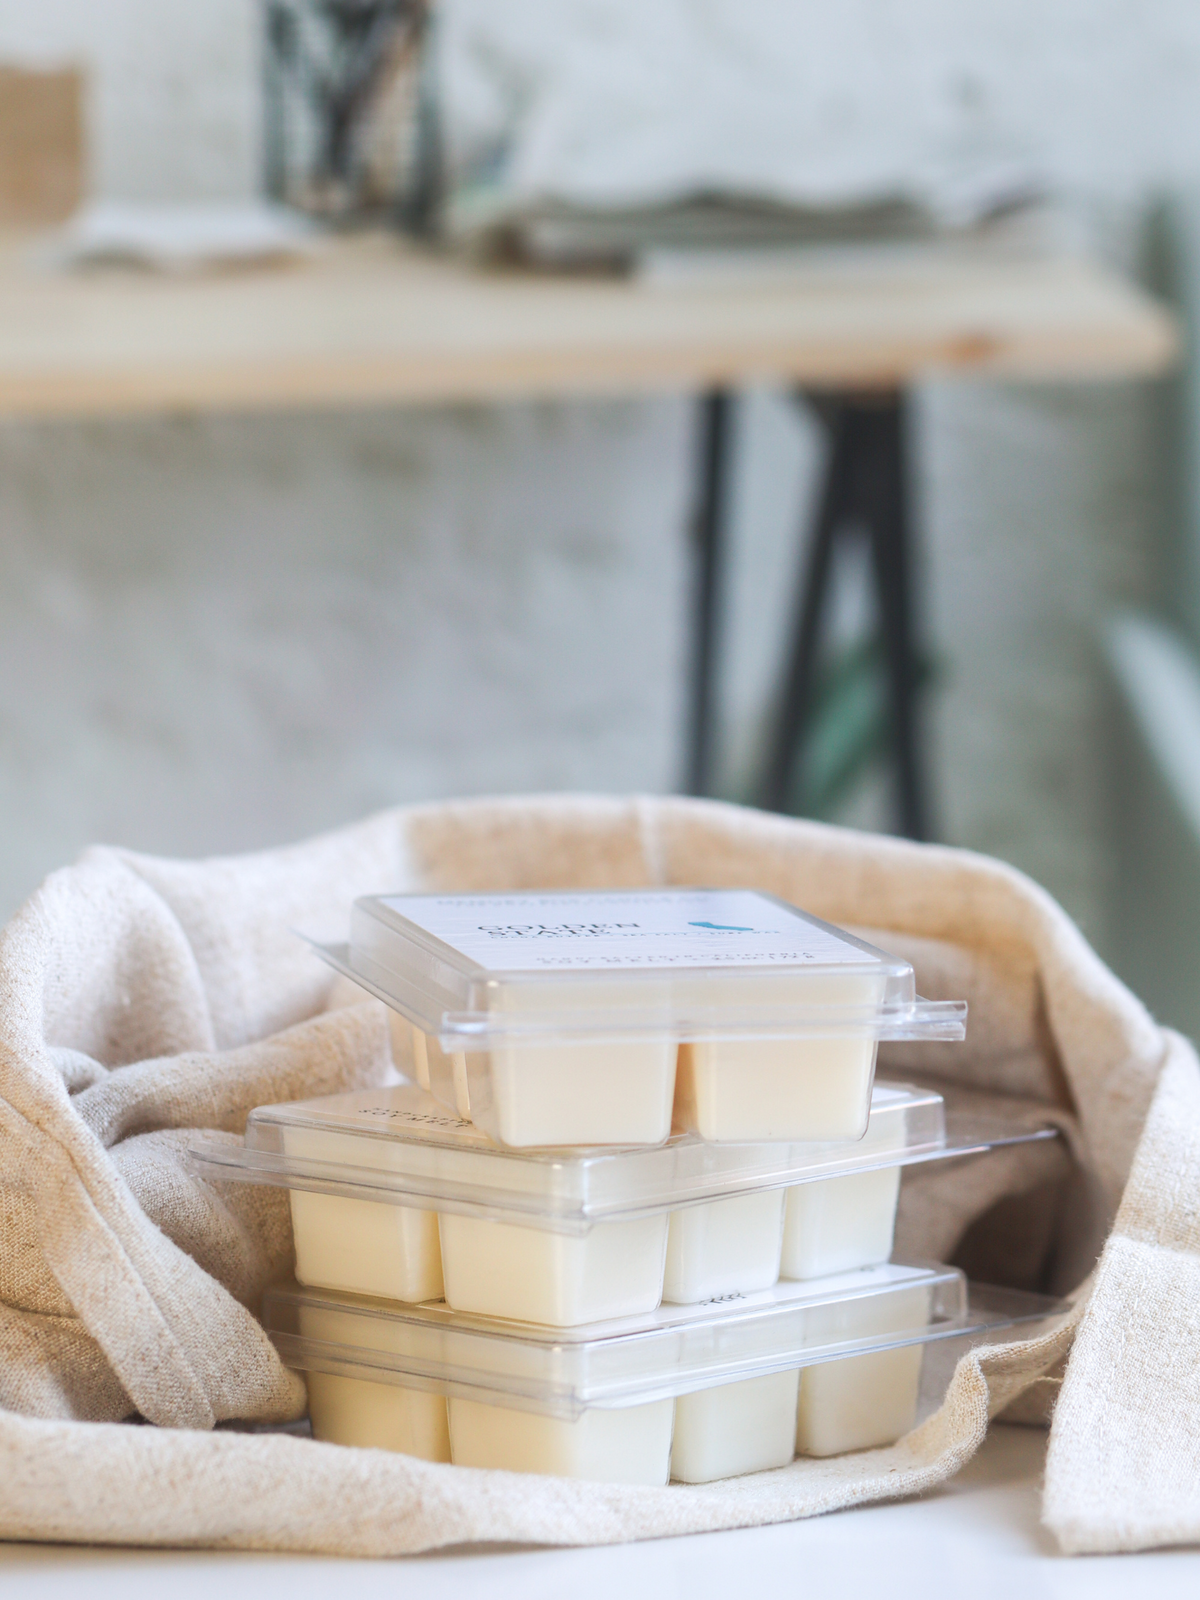 Sweet Scented Wax Melts Selection - Fosse Living